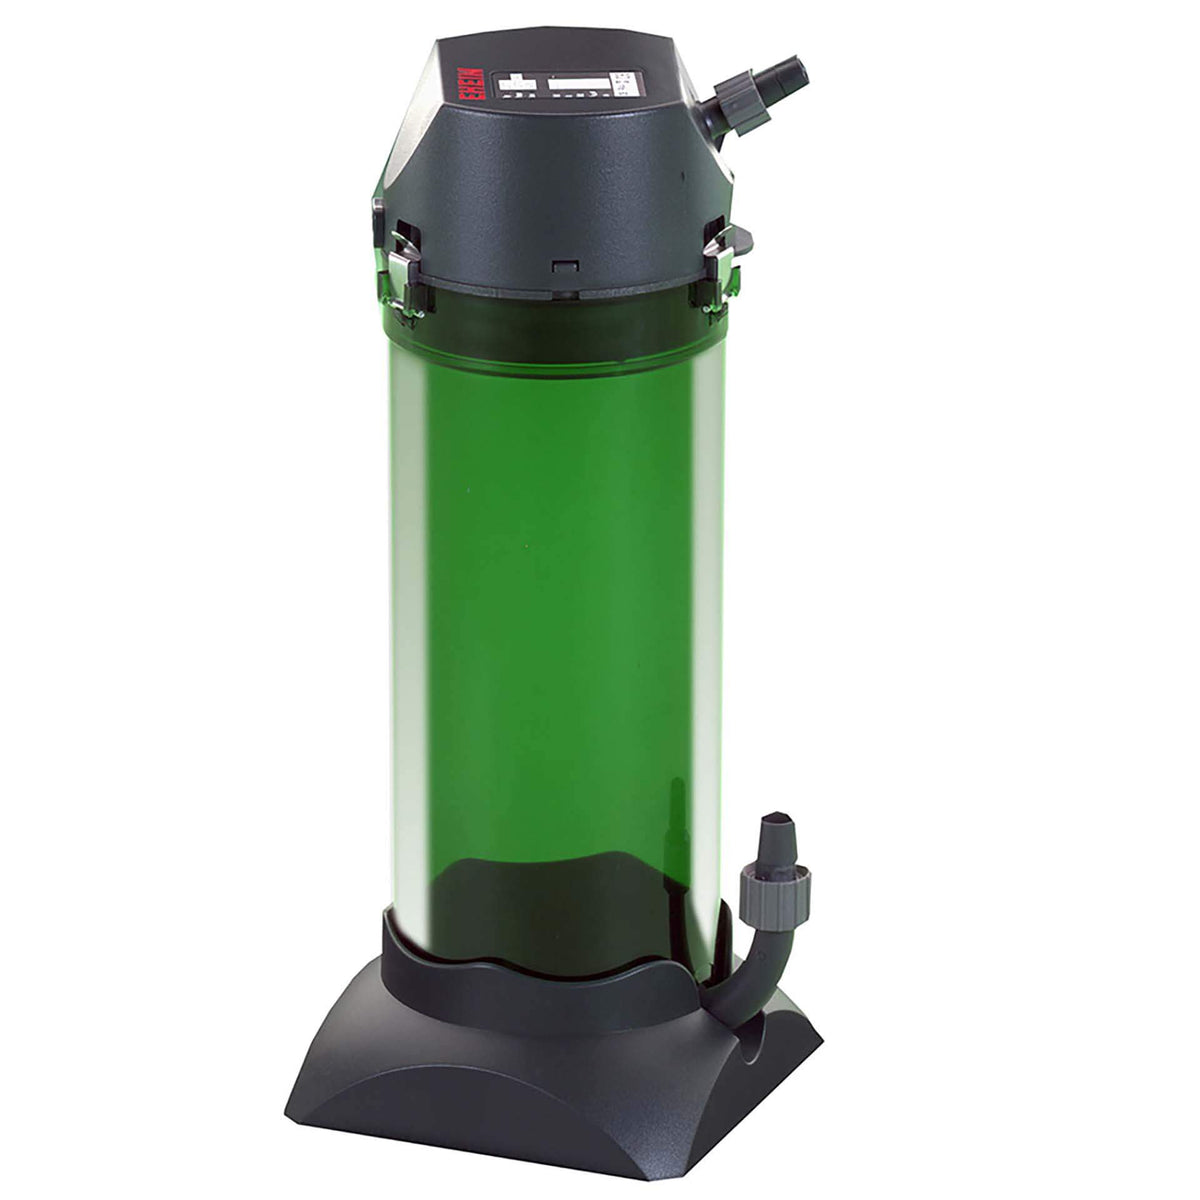 Eheim Classic 150 - 2211 (With Sponge and Bio Media) Canister Filter